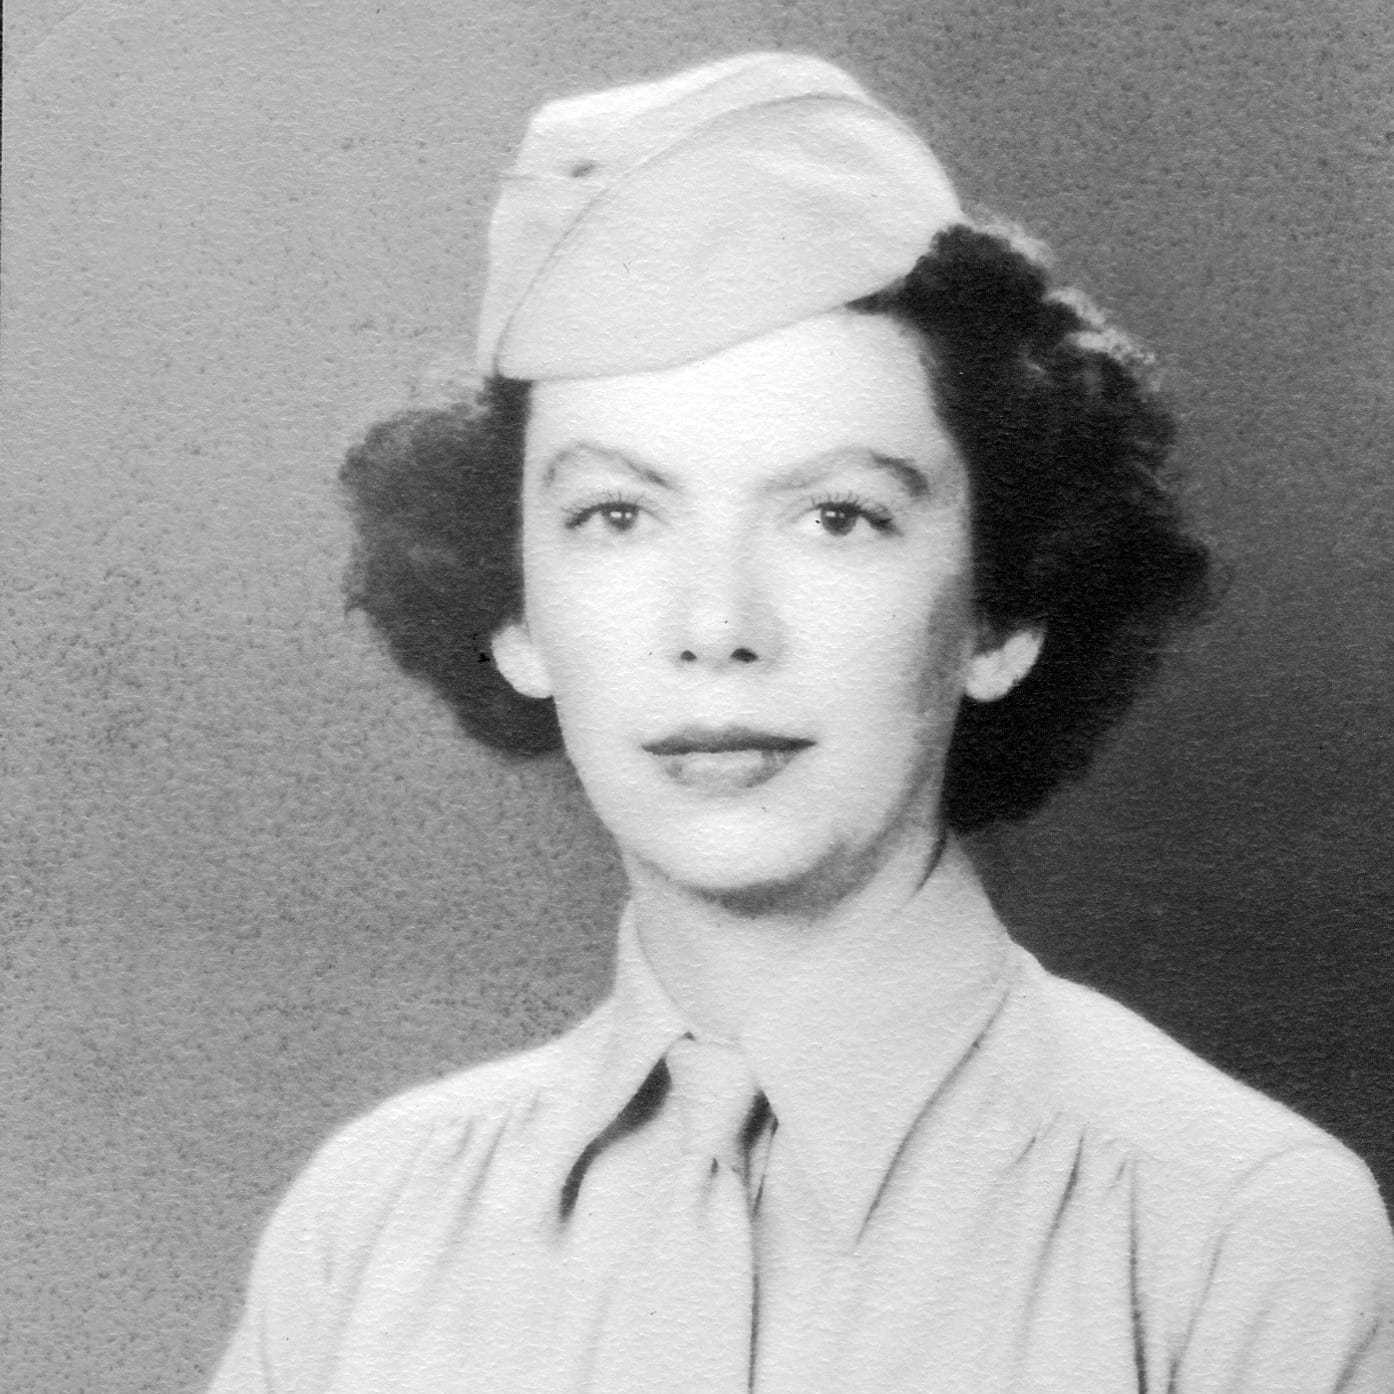 A black and white portrait photograph of Elizabeth wearing an Army Recruiting hat with a shirt and tie.